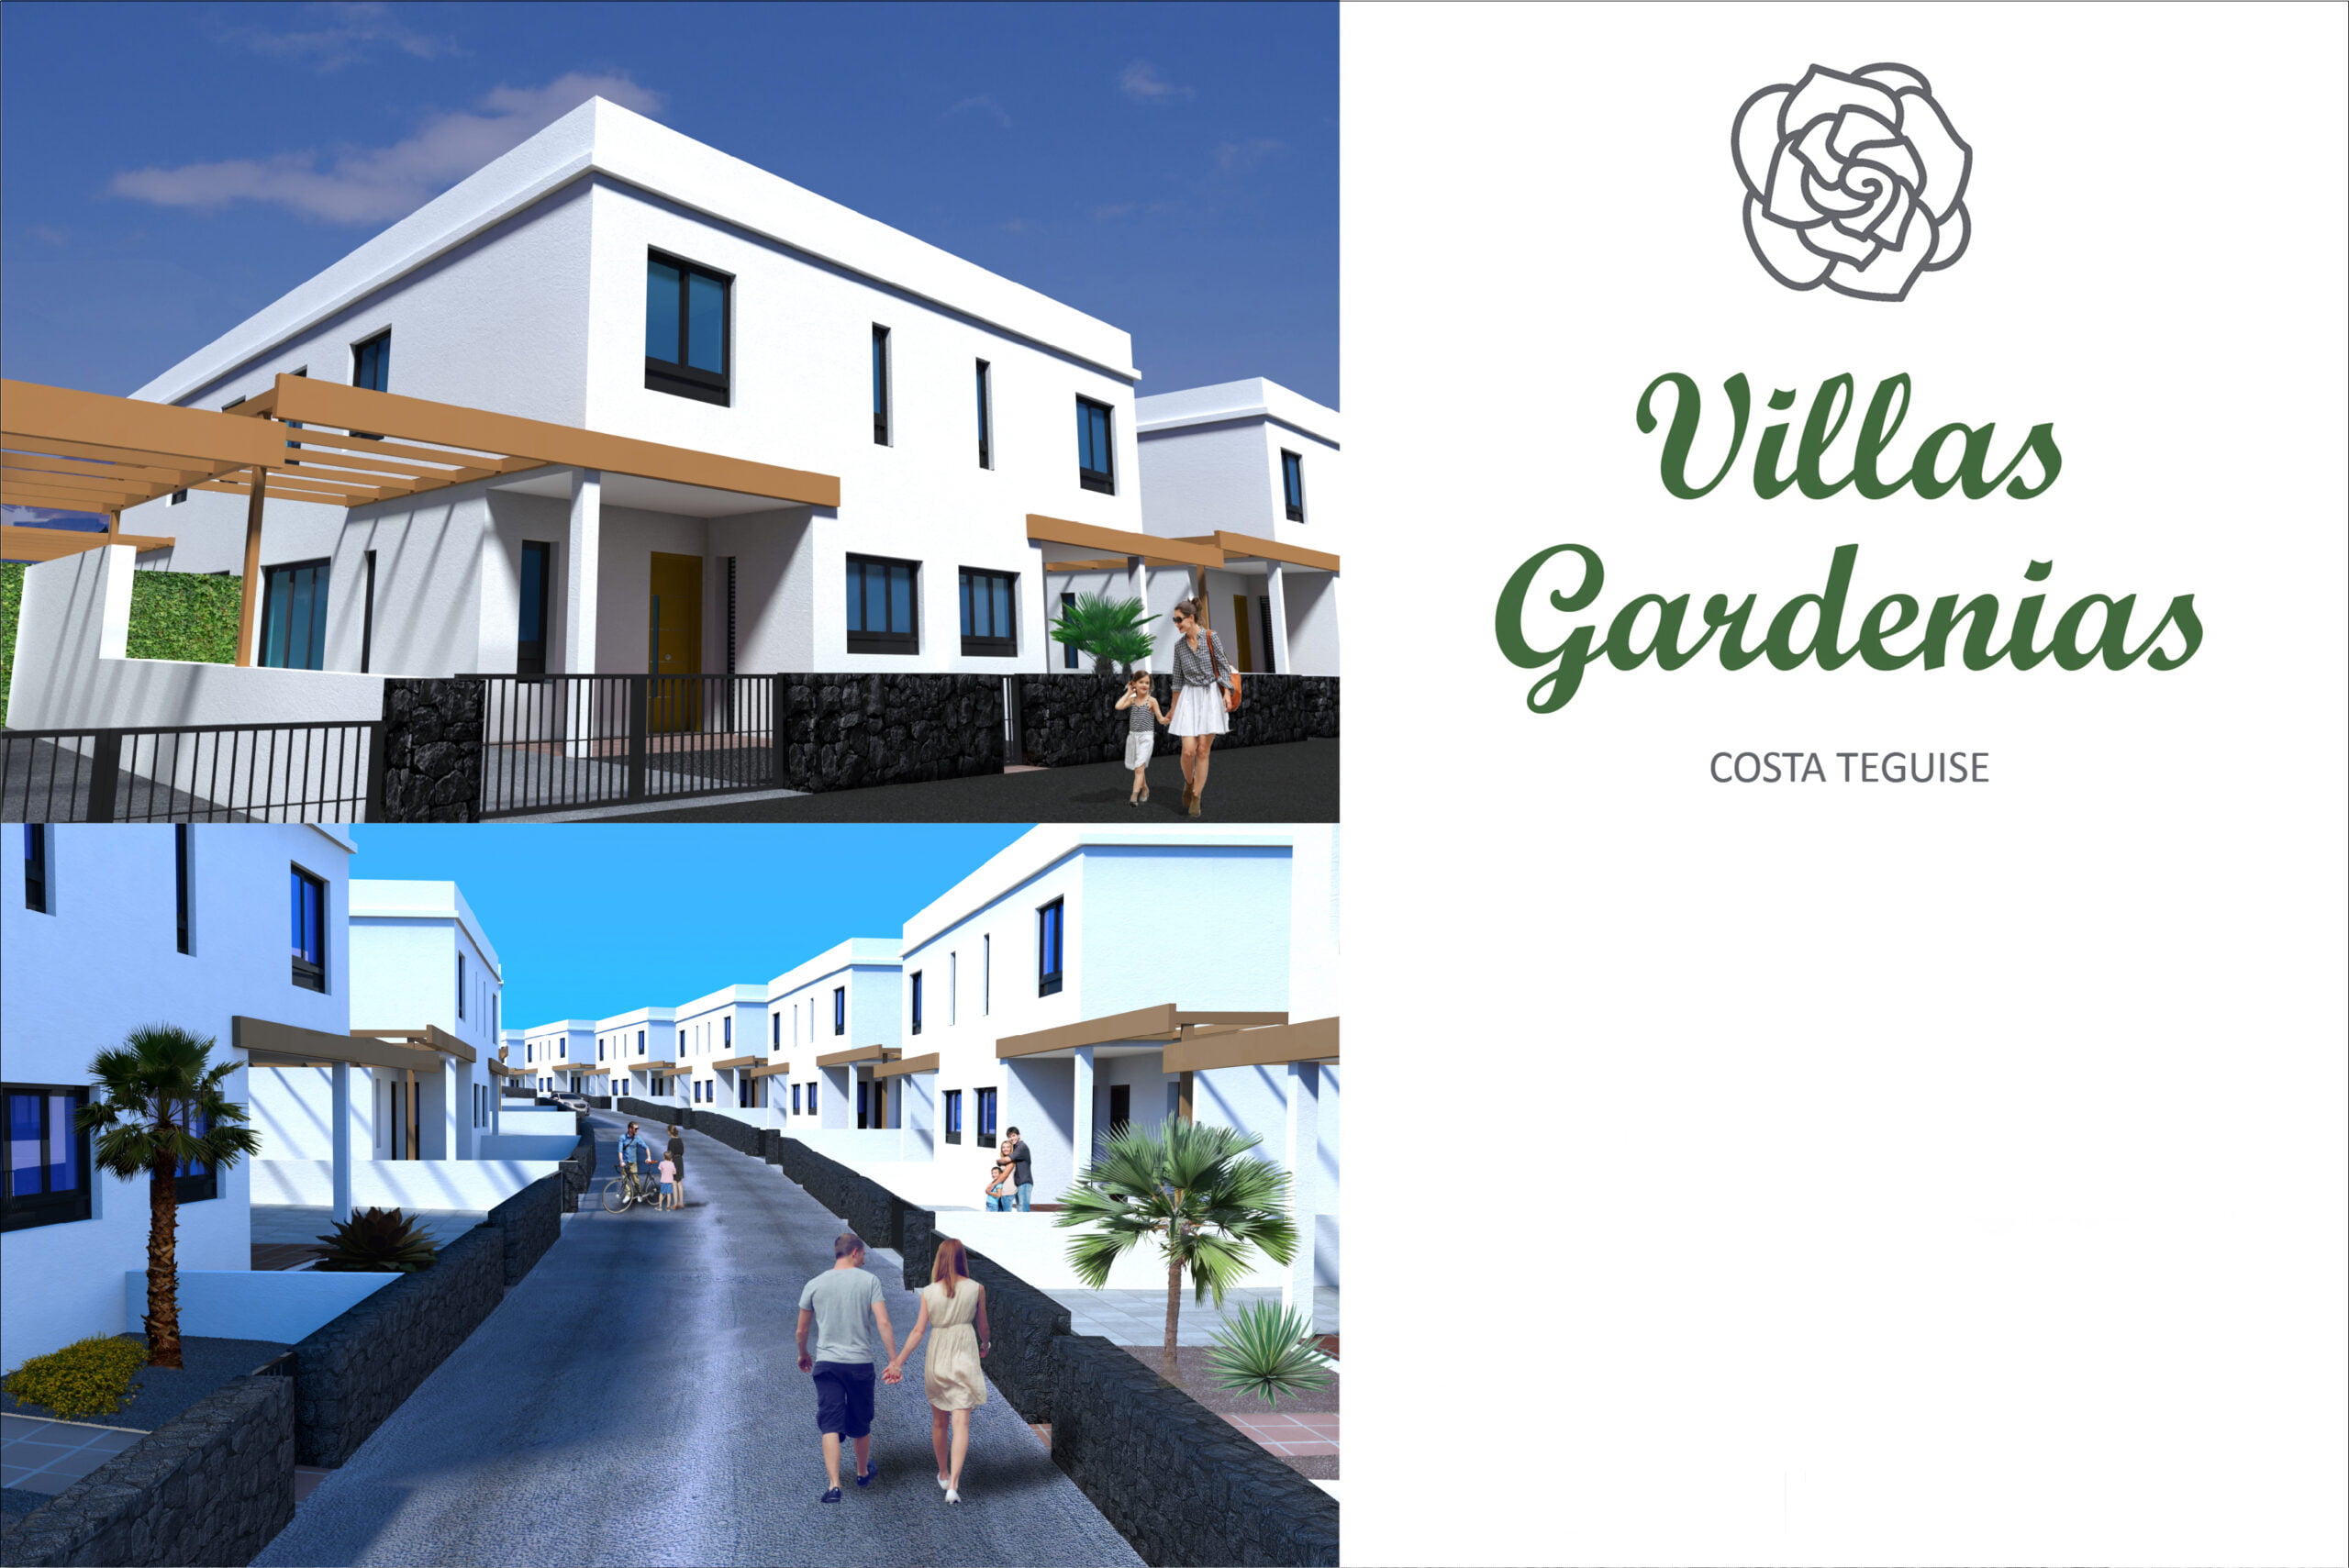 Fantastic Opportunity To Buy A Semi Detached Villa In Costa Teguise On Plan With The Most Modern Specifications In A Quiet Residential Area.